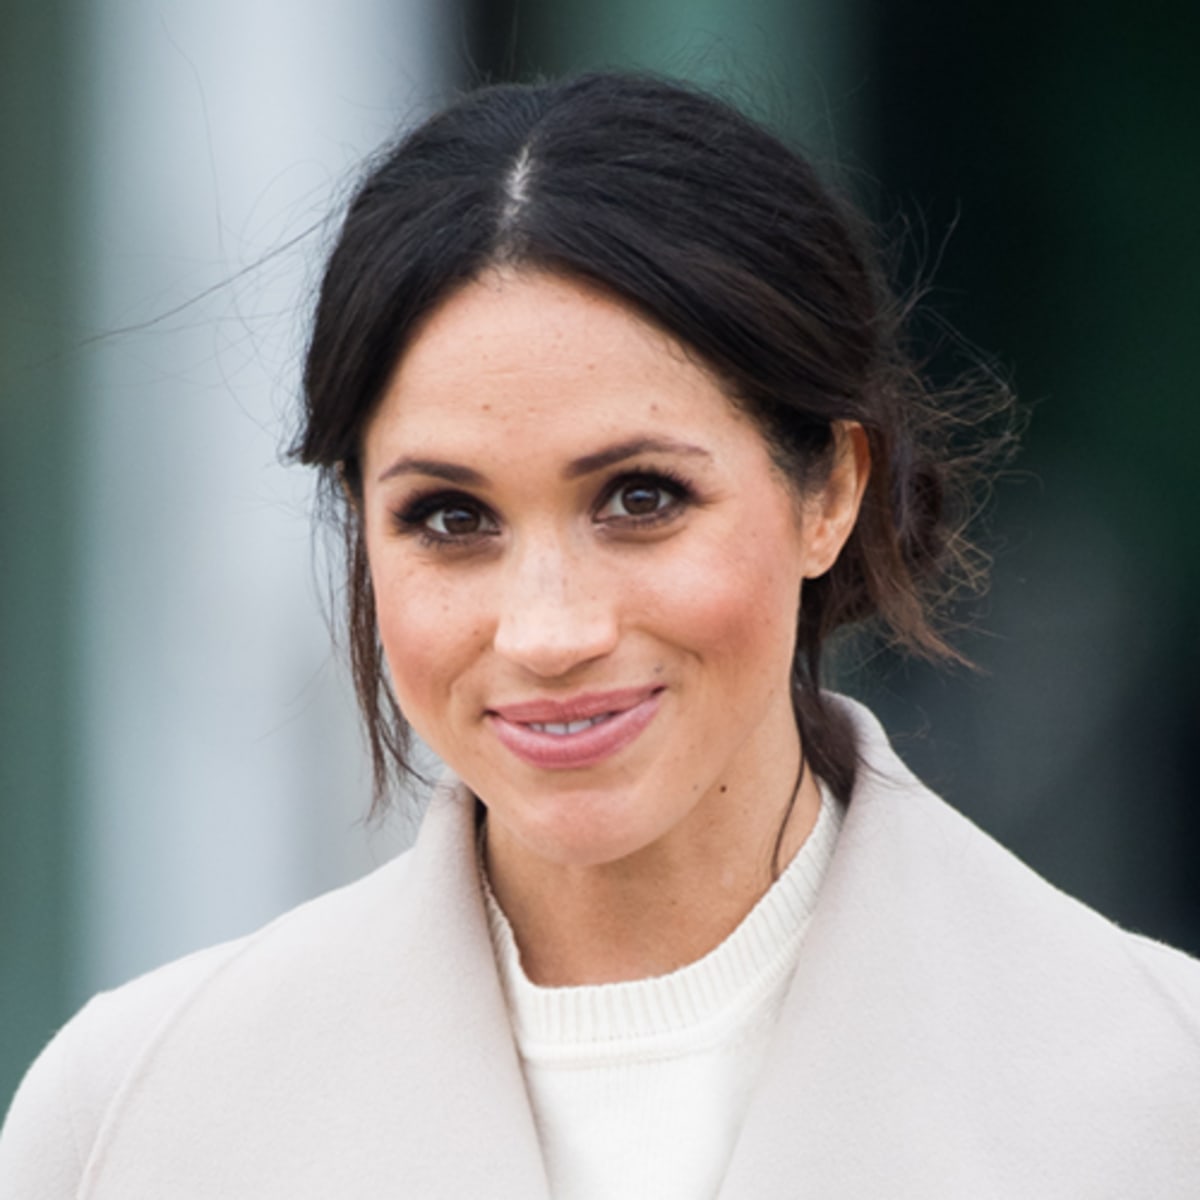 Meghan Markle Friendless And In a Lonely Downward Spiral After A List Snubs? Time 100 Photoshoot